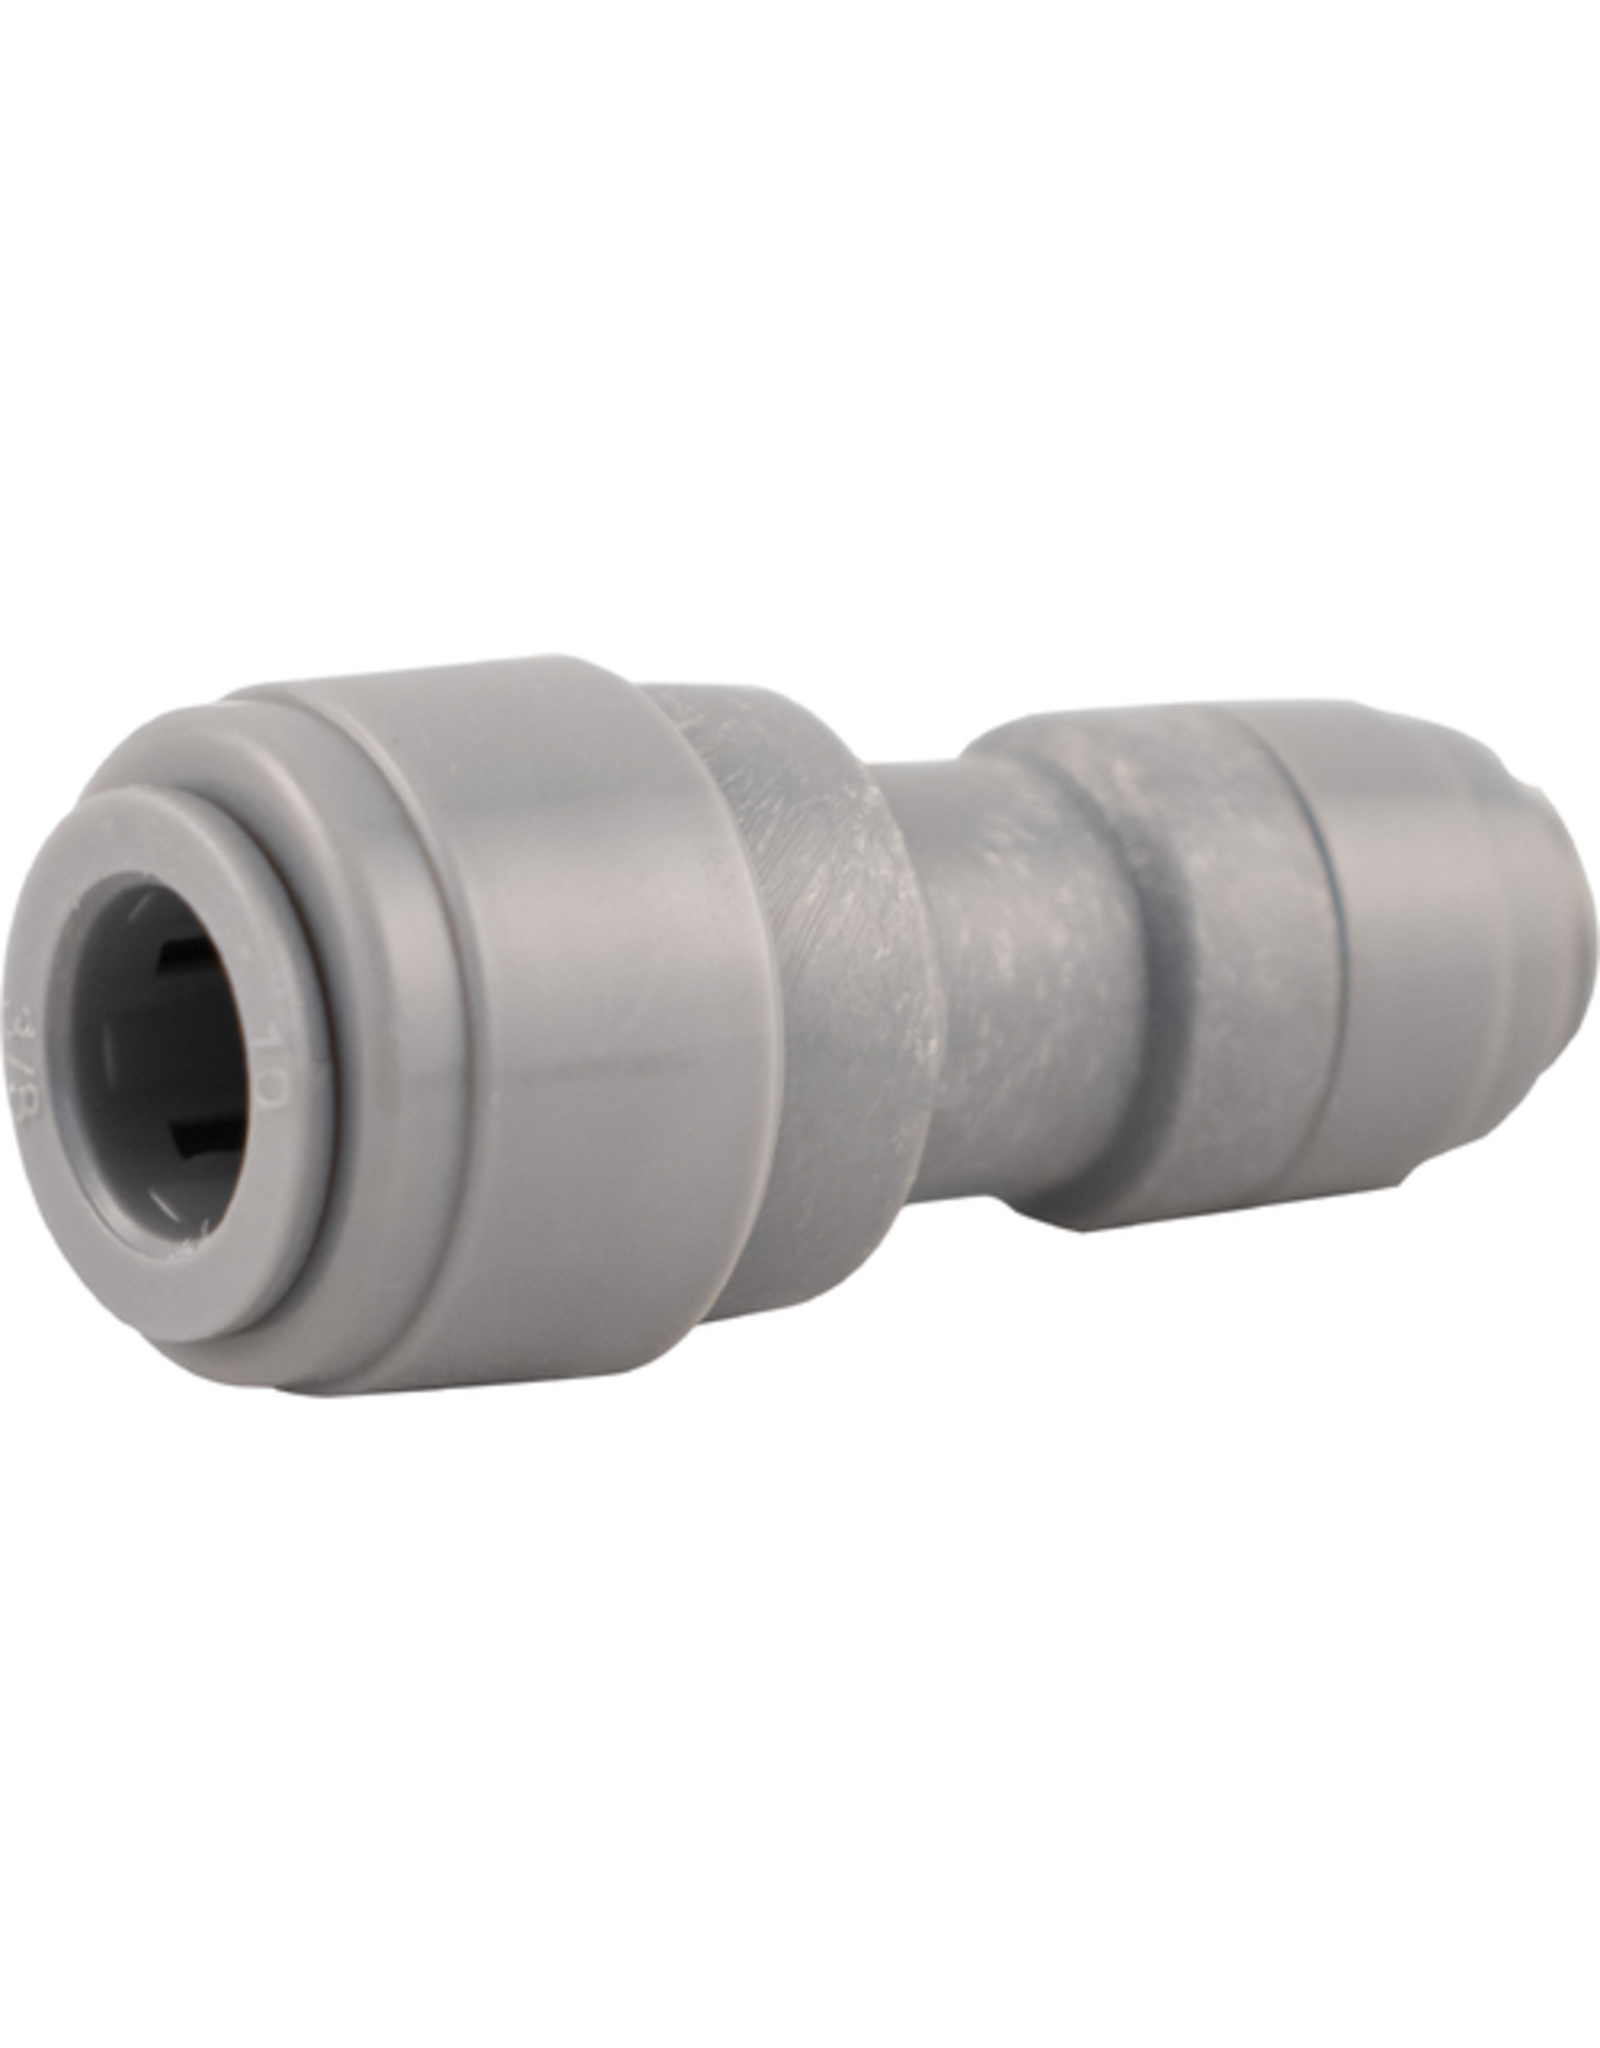 KegLand Duotight Push-In Fitting - 6.35 mm (1/4 in.) x 9.5 mm (3/8 in.) Reducer